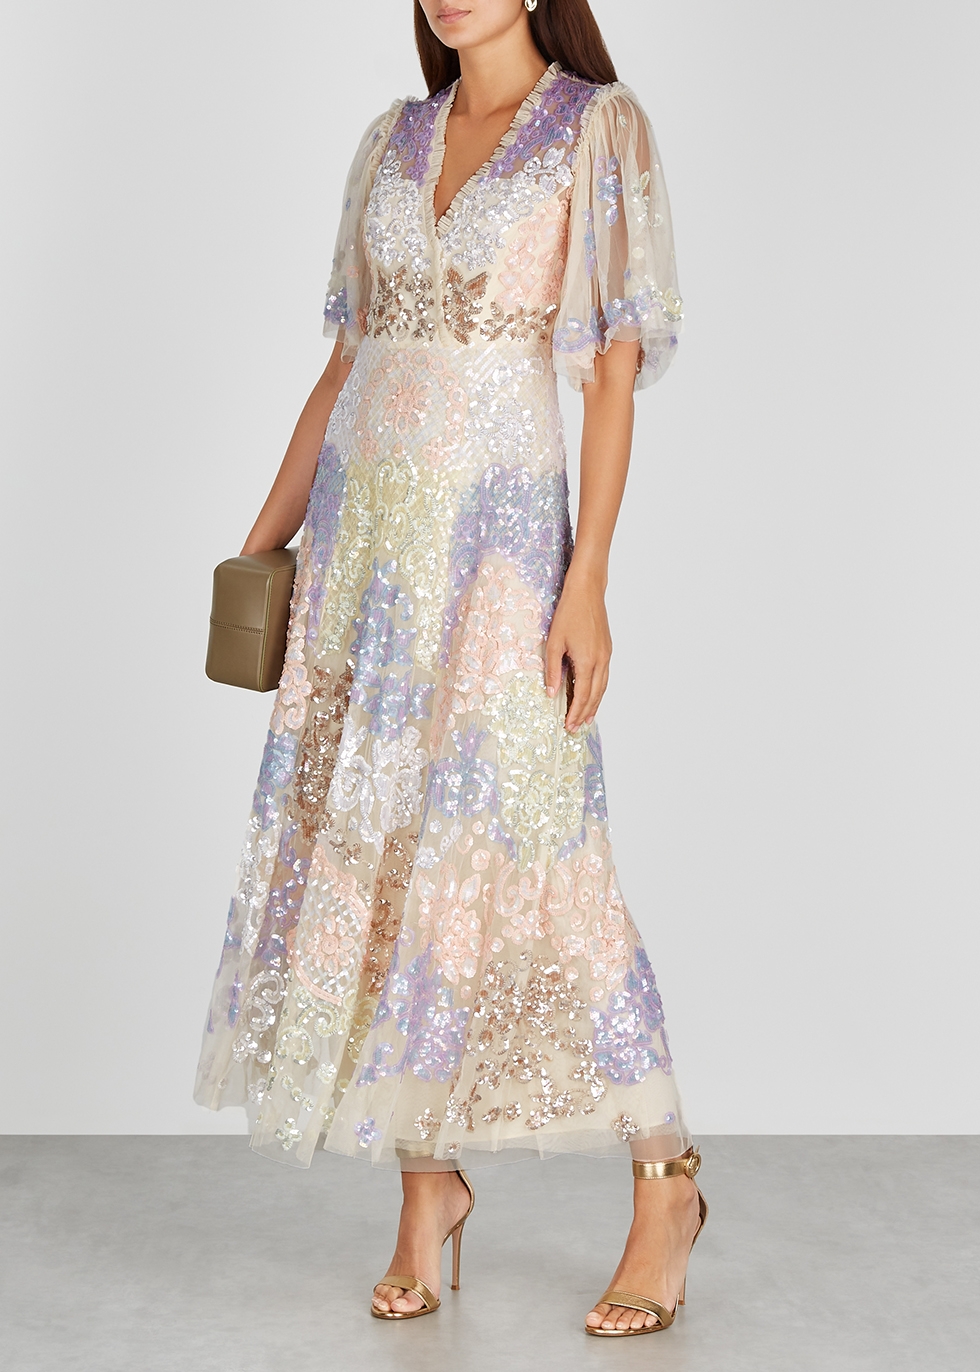 needle and thread sequin dress